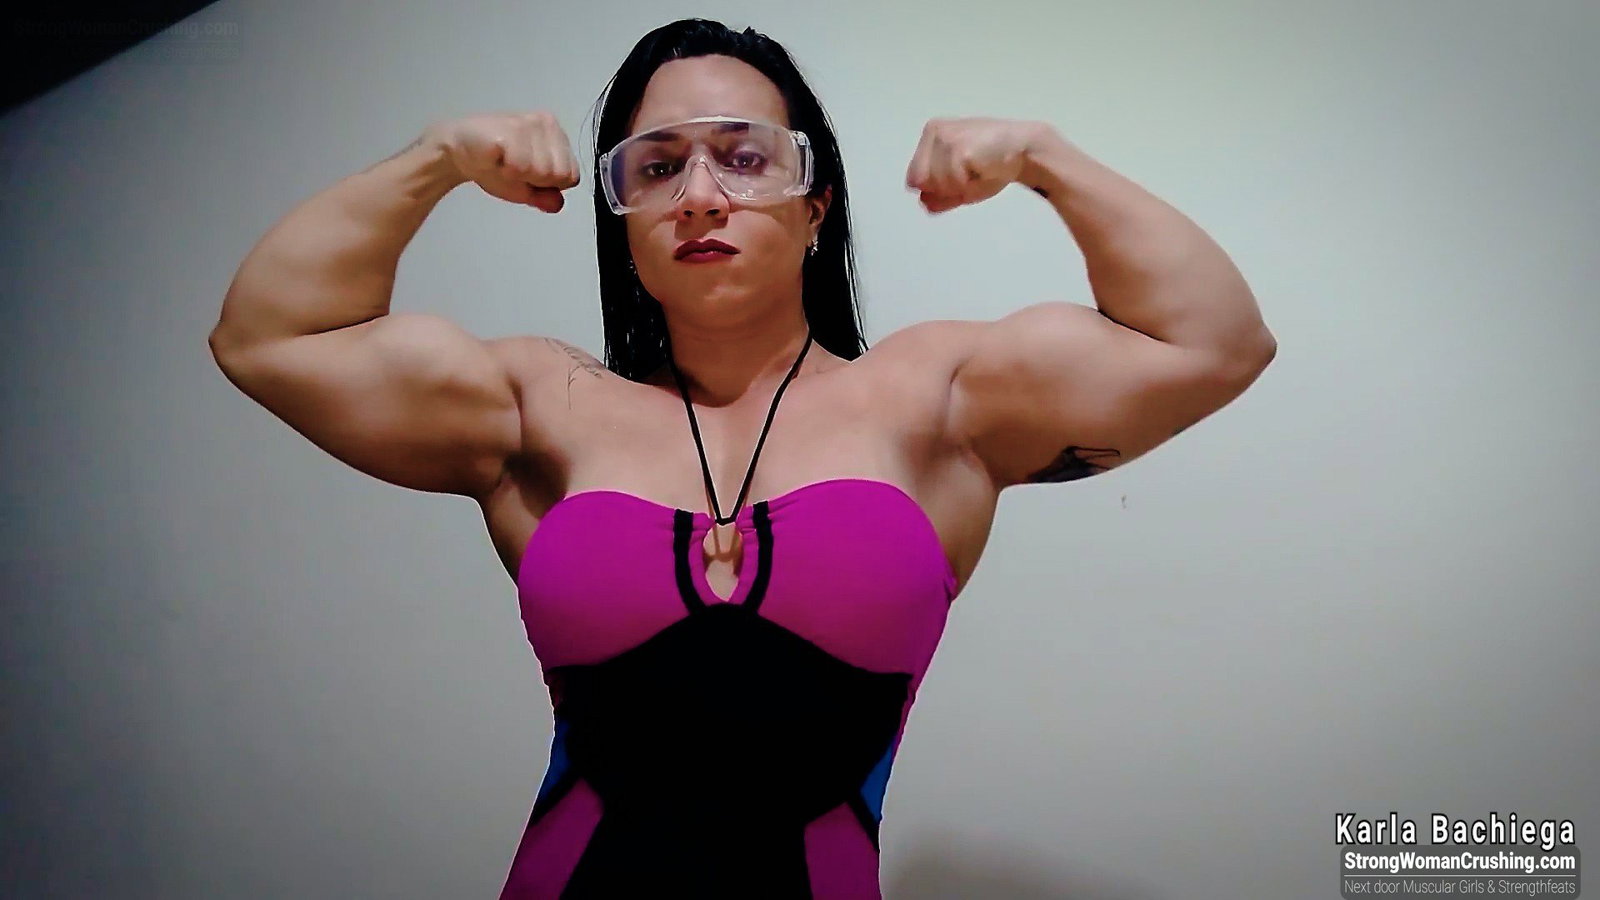 Watch the Photo by MusclegirlStrength with the username @MusclegirlStrength, who is a brand user, posted on August 24, 2023 and the text says '💪 Check out Karla Bachiega, the muscular destroyer! 💪 Get your membership now to watch her video and learn her secrets 🤩 at https://www.strongwomancrushing.com/ 🤩 #strongwoman #karla #muscular #destroyer #crushing'